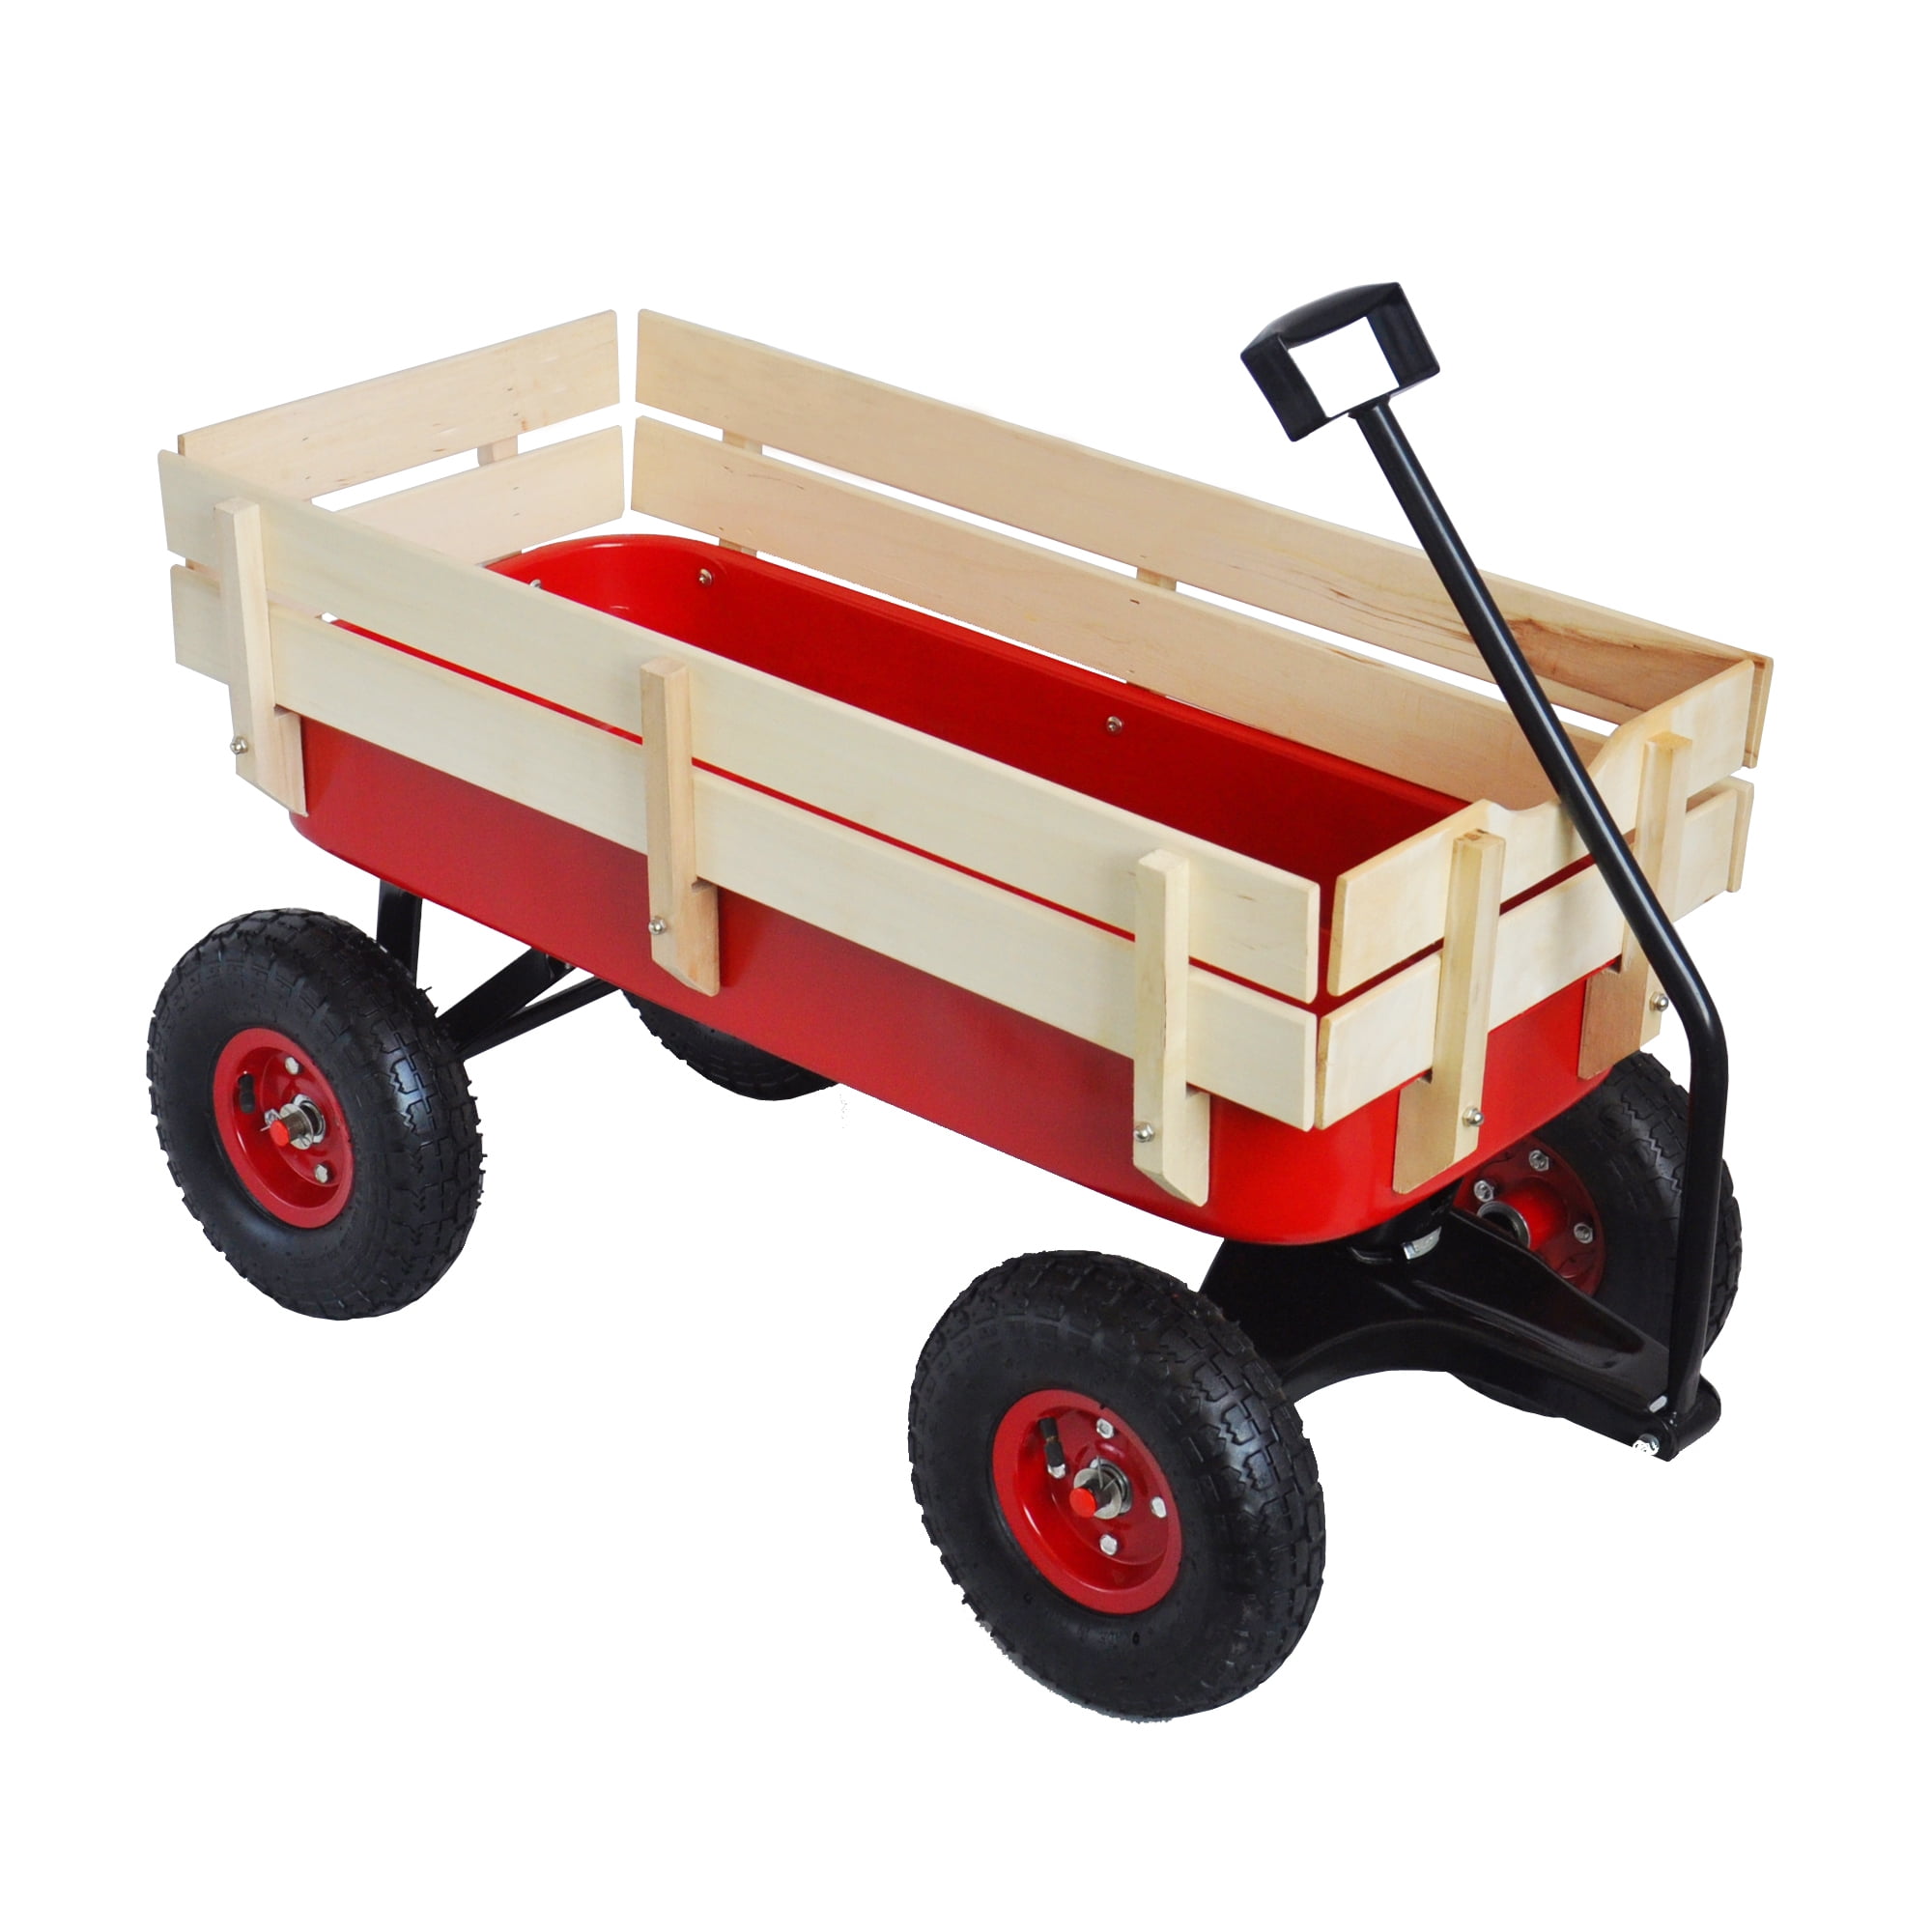 Details about   Bosmere All Purpose Garden Cart 